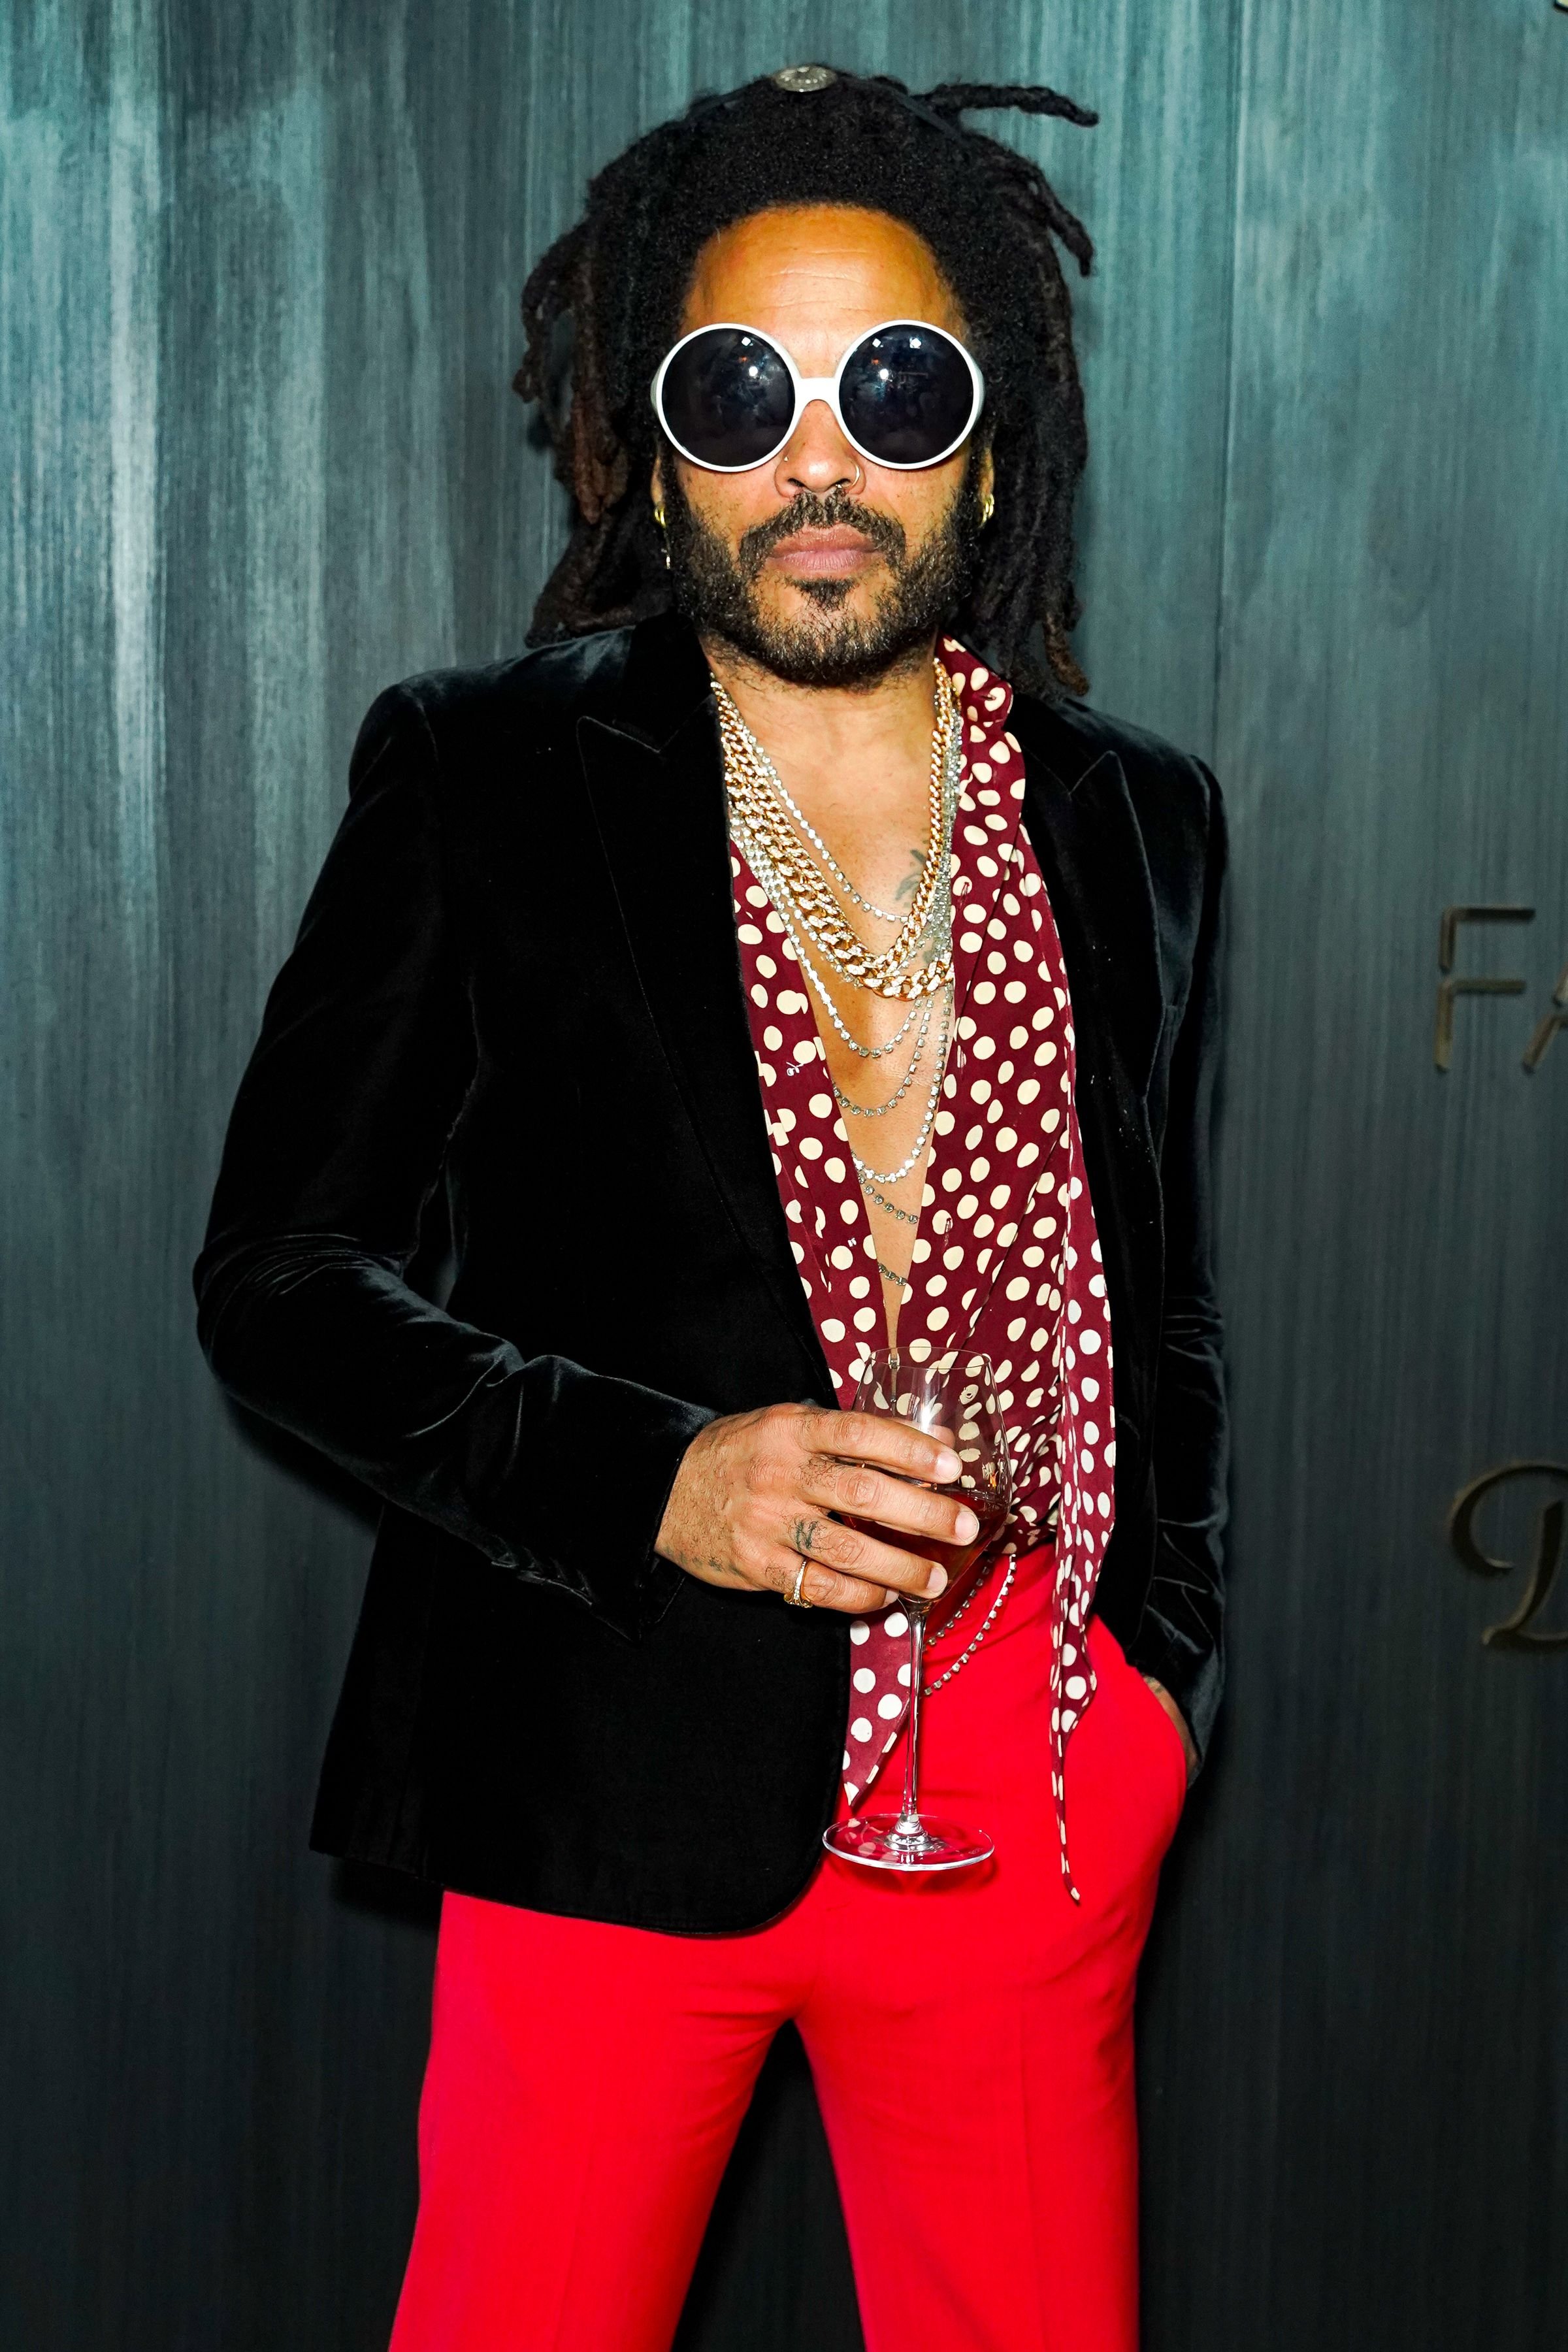 Lenny Kravitz during Dom Perignon Last Supper Party on December 04, 2019 in Miami, Florida. | Source: Getty Images